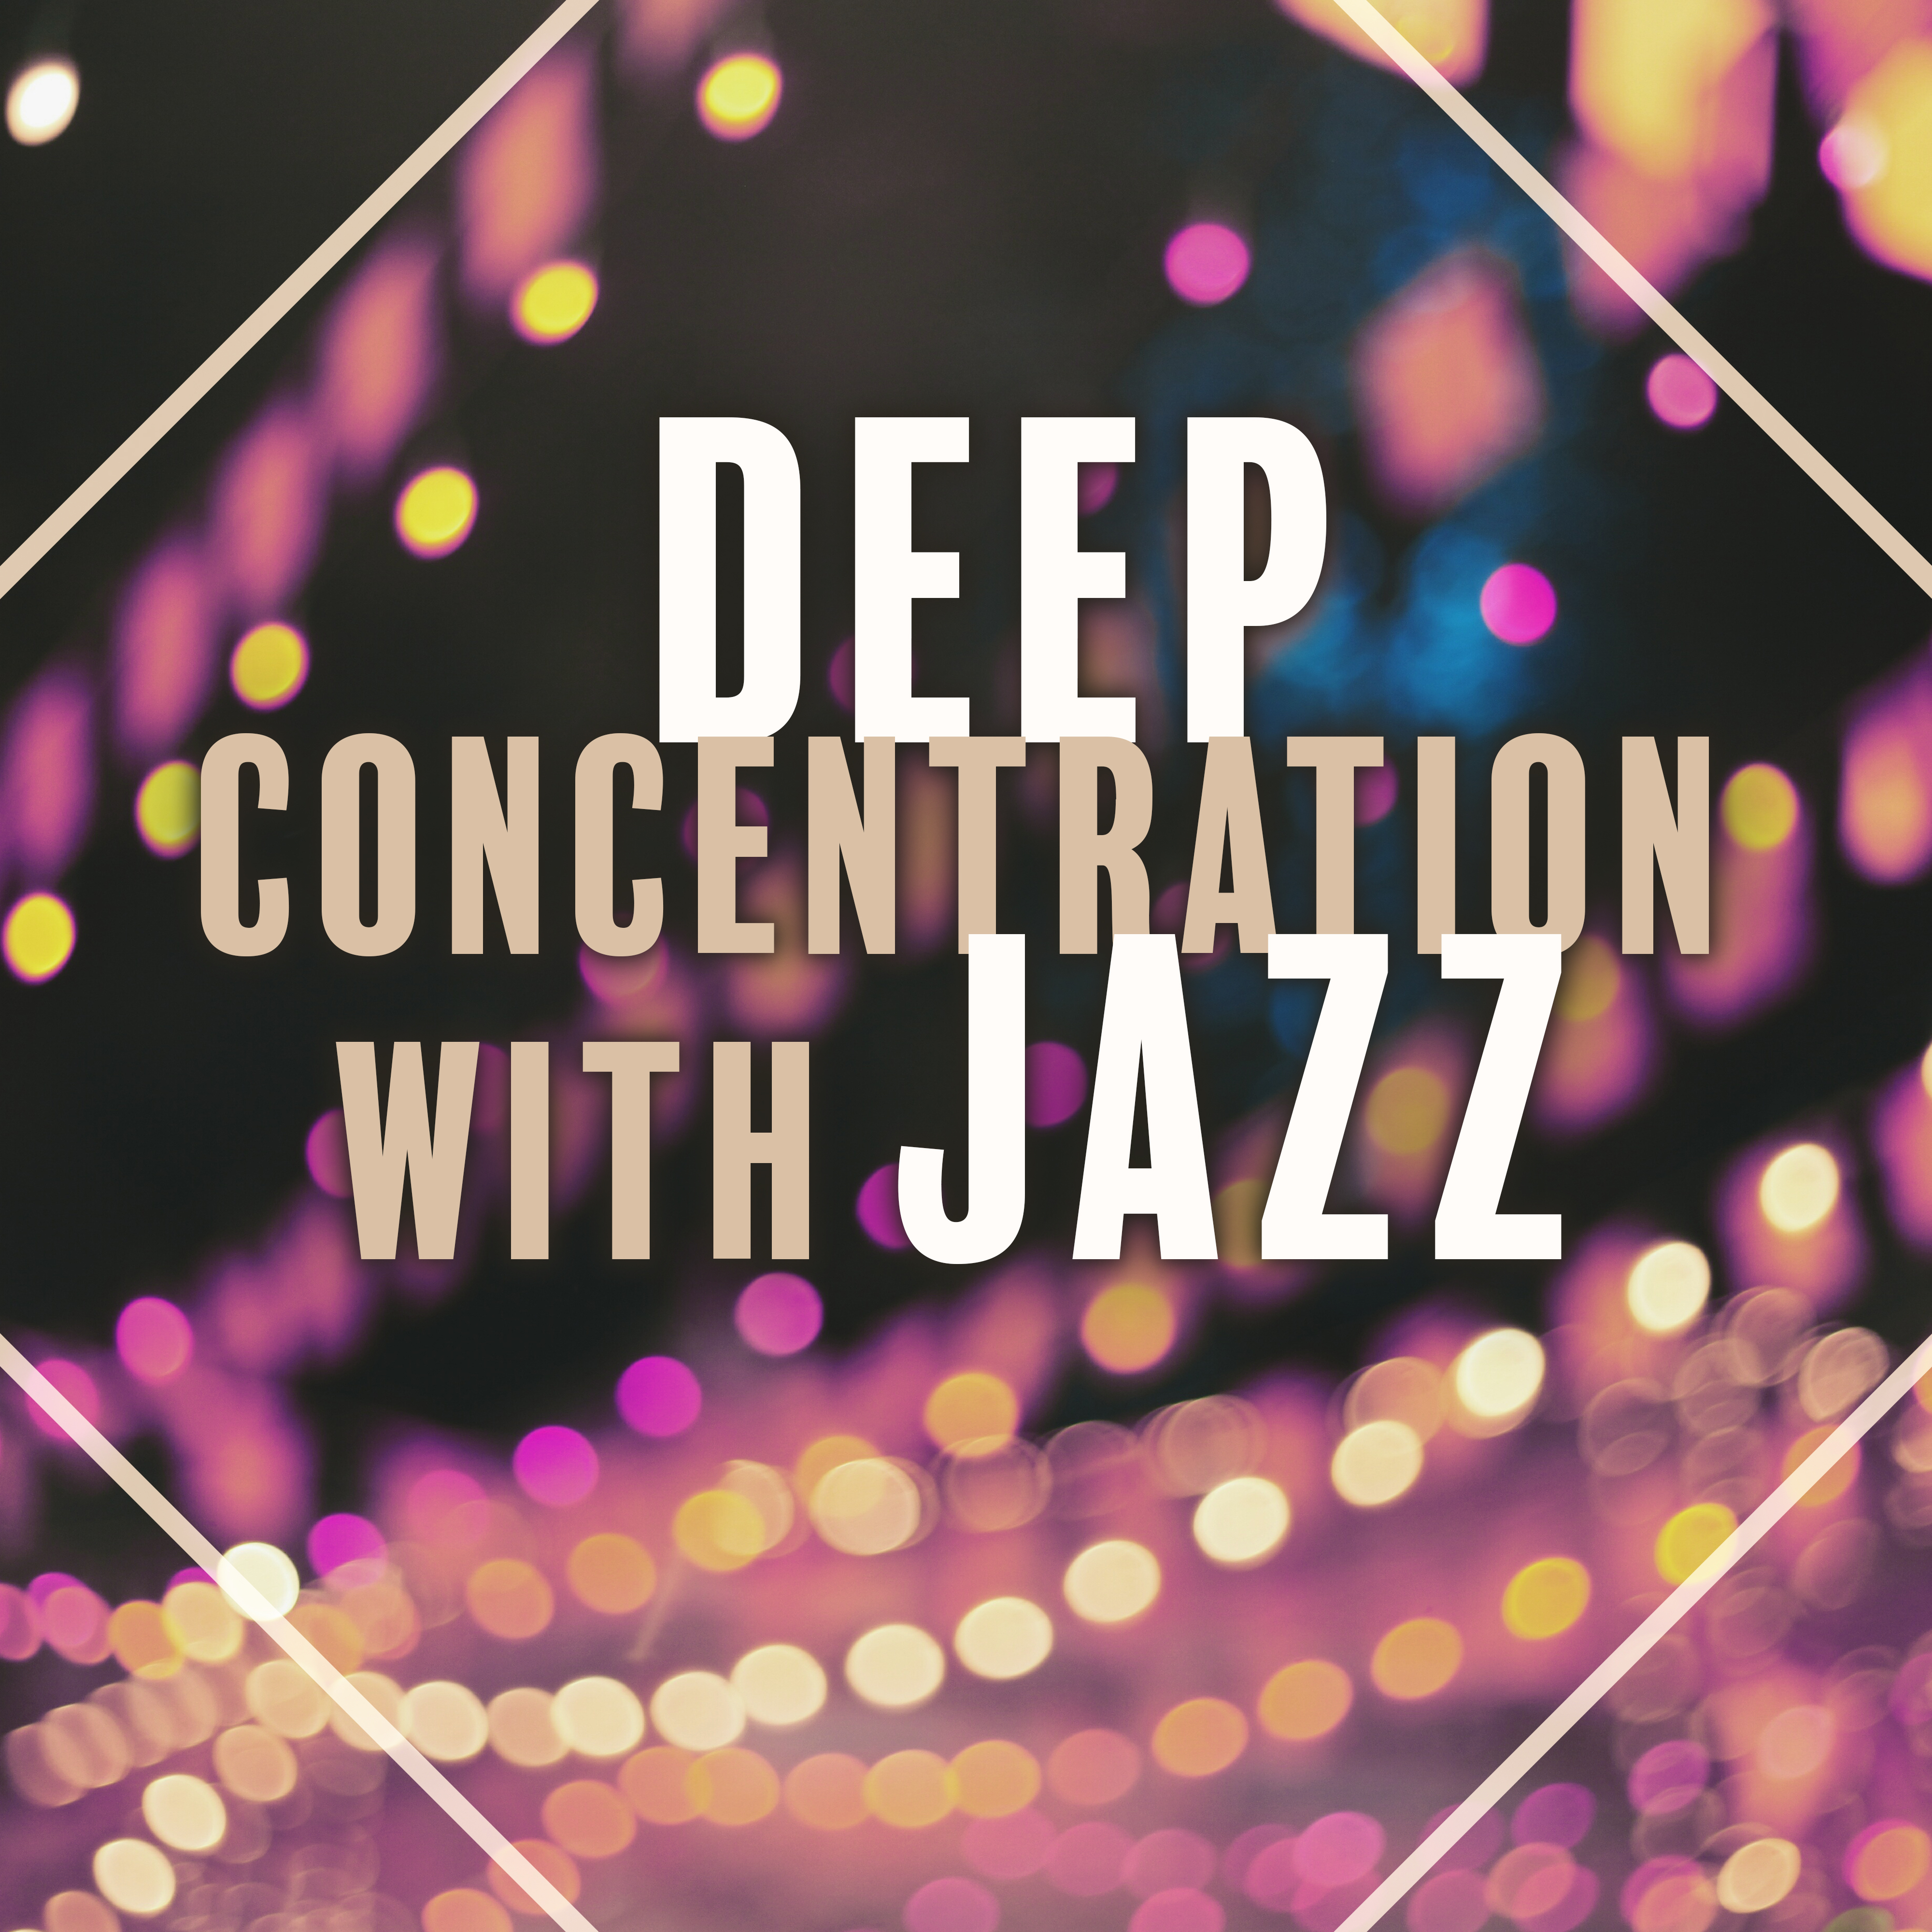 Deep Concentration with Jazz – Music for Study, Mellow Jazz, Brain Power, Peaceful Piano, Better Memory